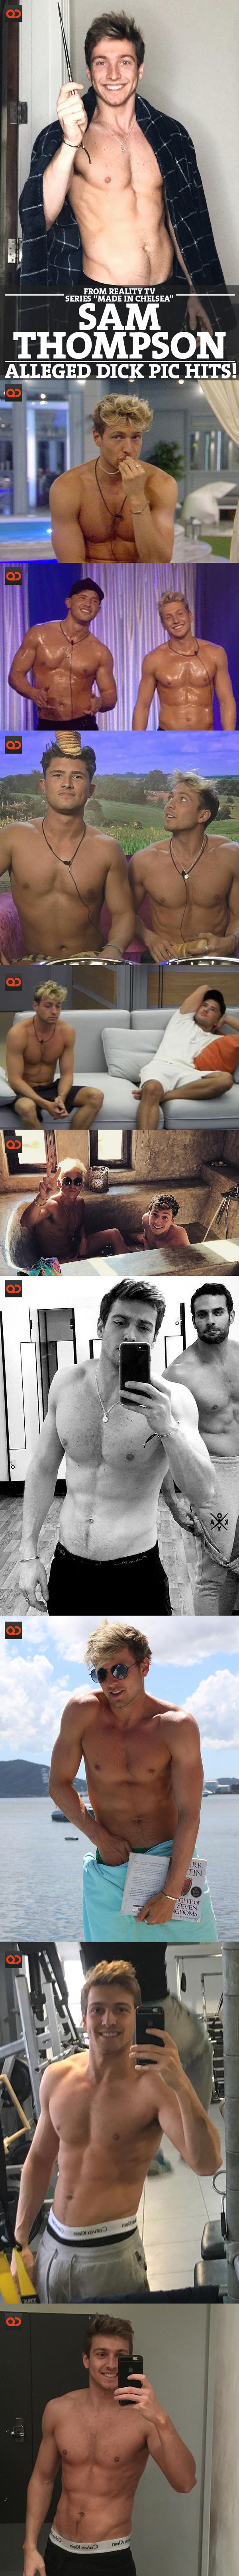 Sam Thompson, From Reality TV Series “Made In Chelsea”, Alleged Dick Pic Hits!